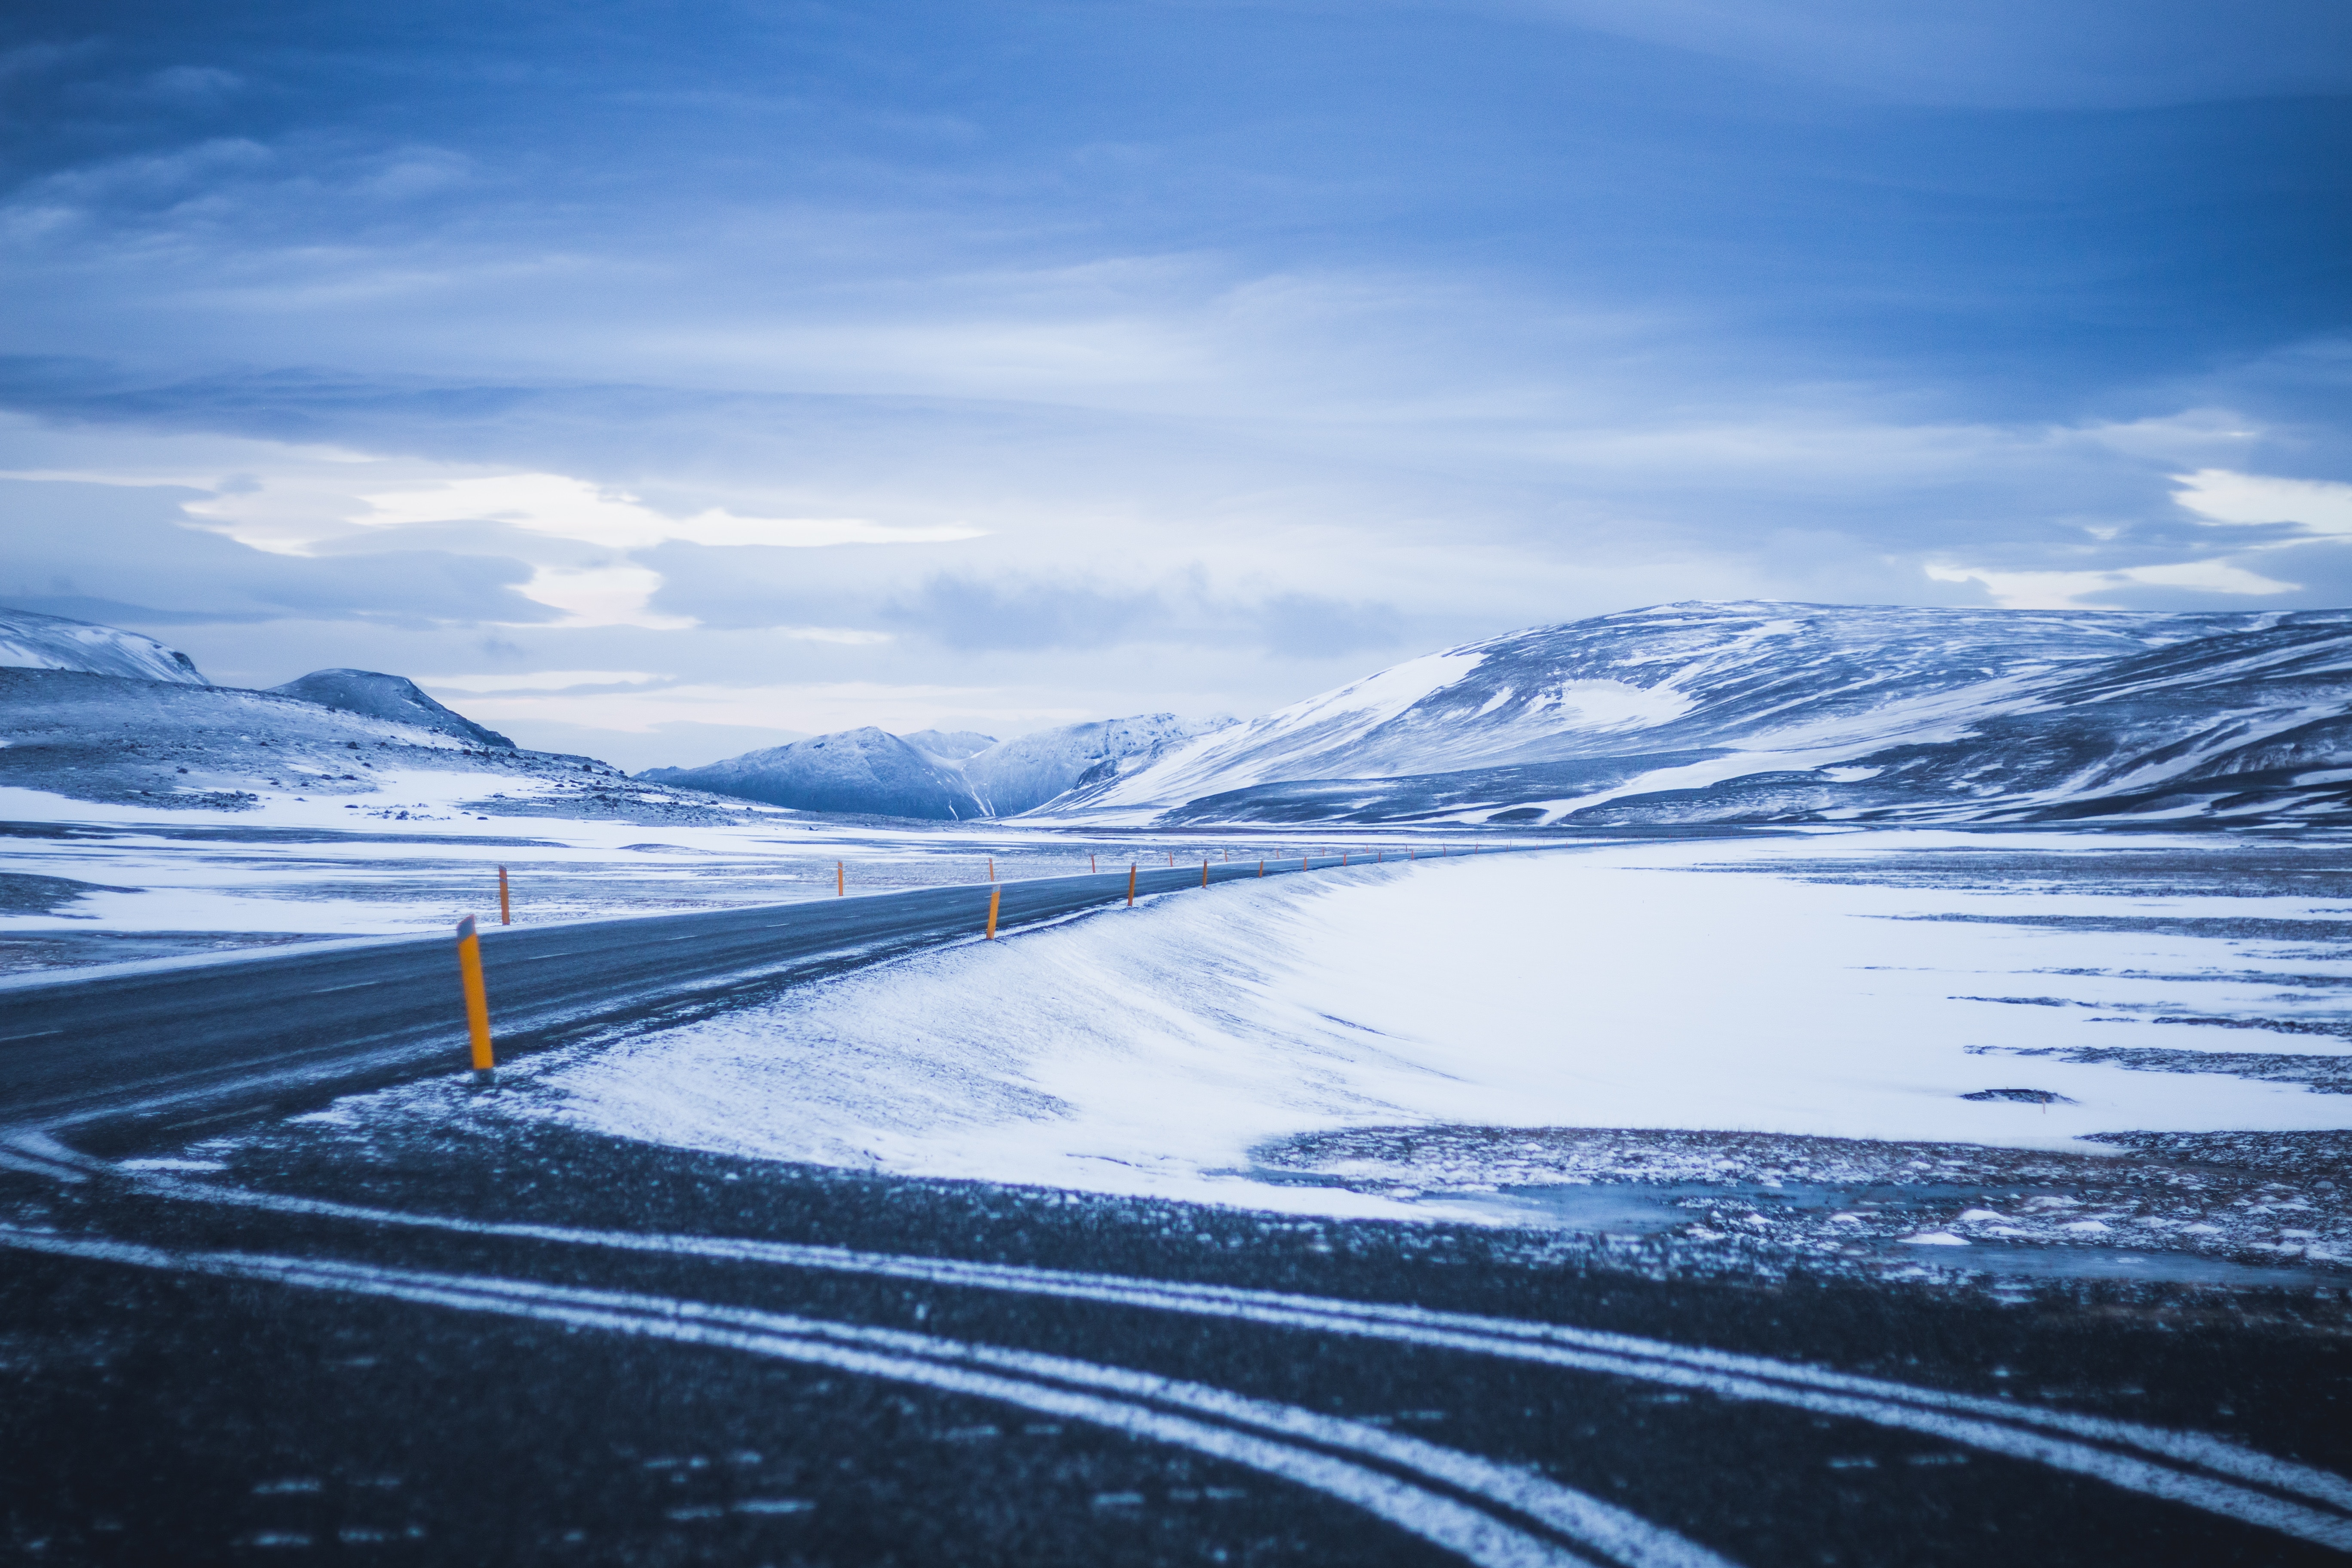 desktop Images winter, nature, mountains, snow, road, turn, snow covered, snowbound